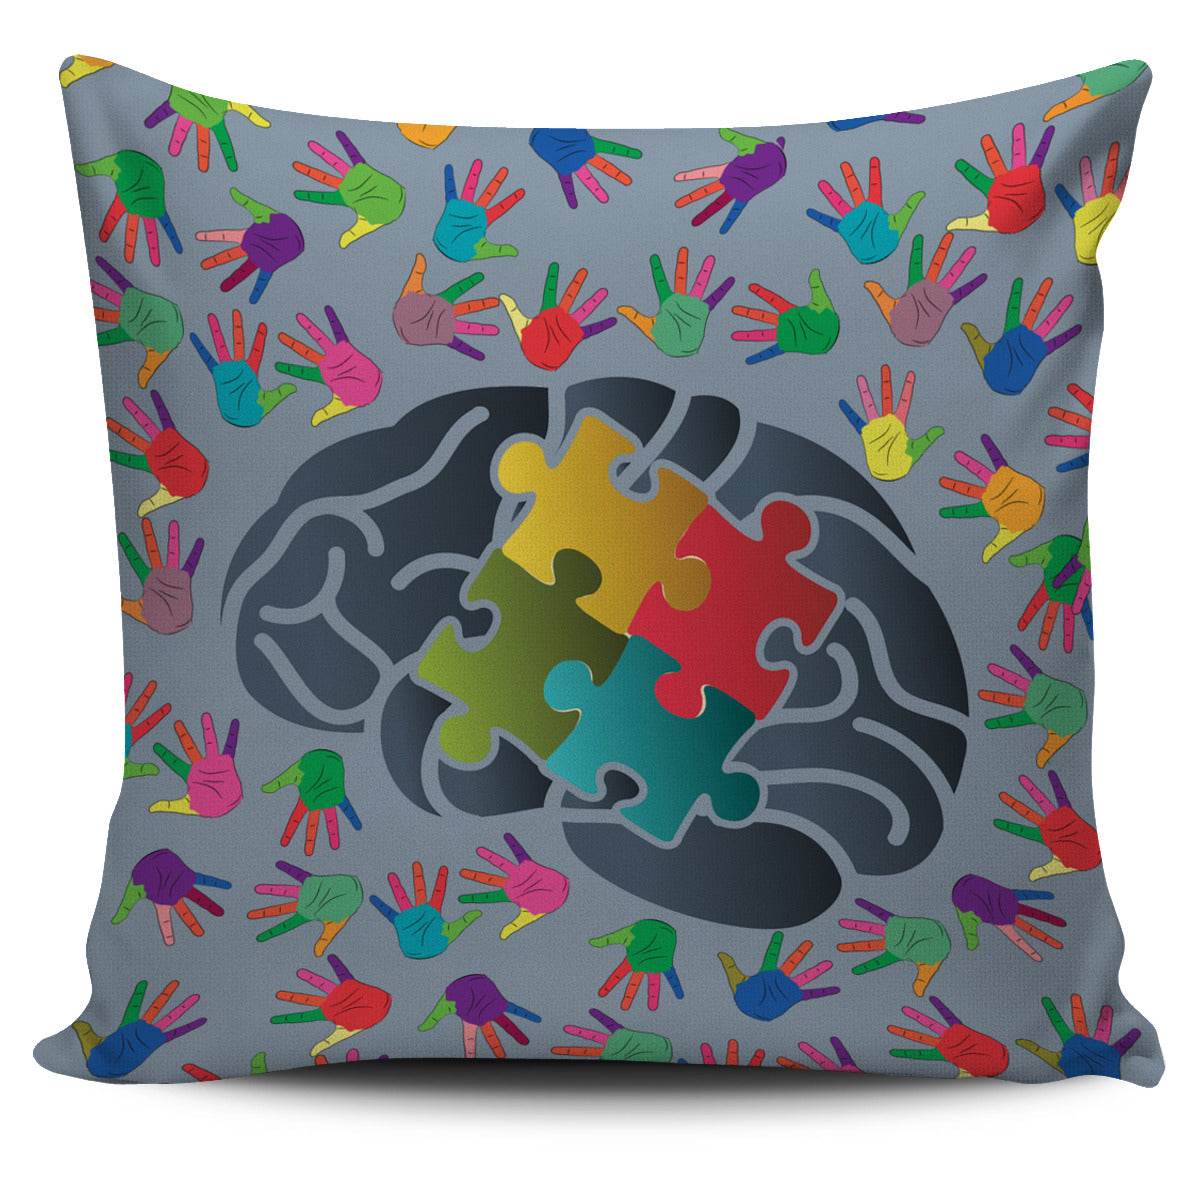 Autism Knowledge Pillow Cover